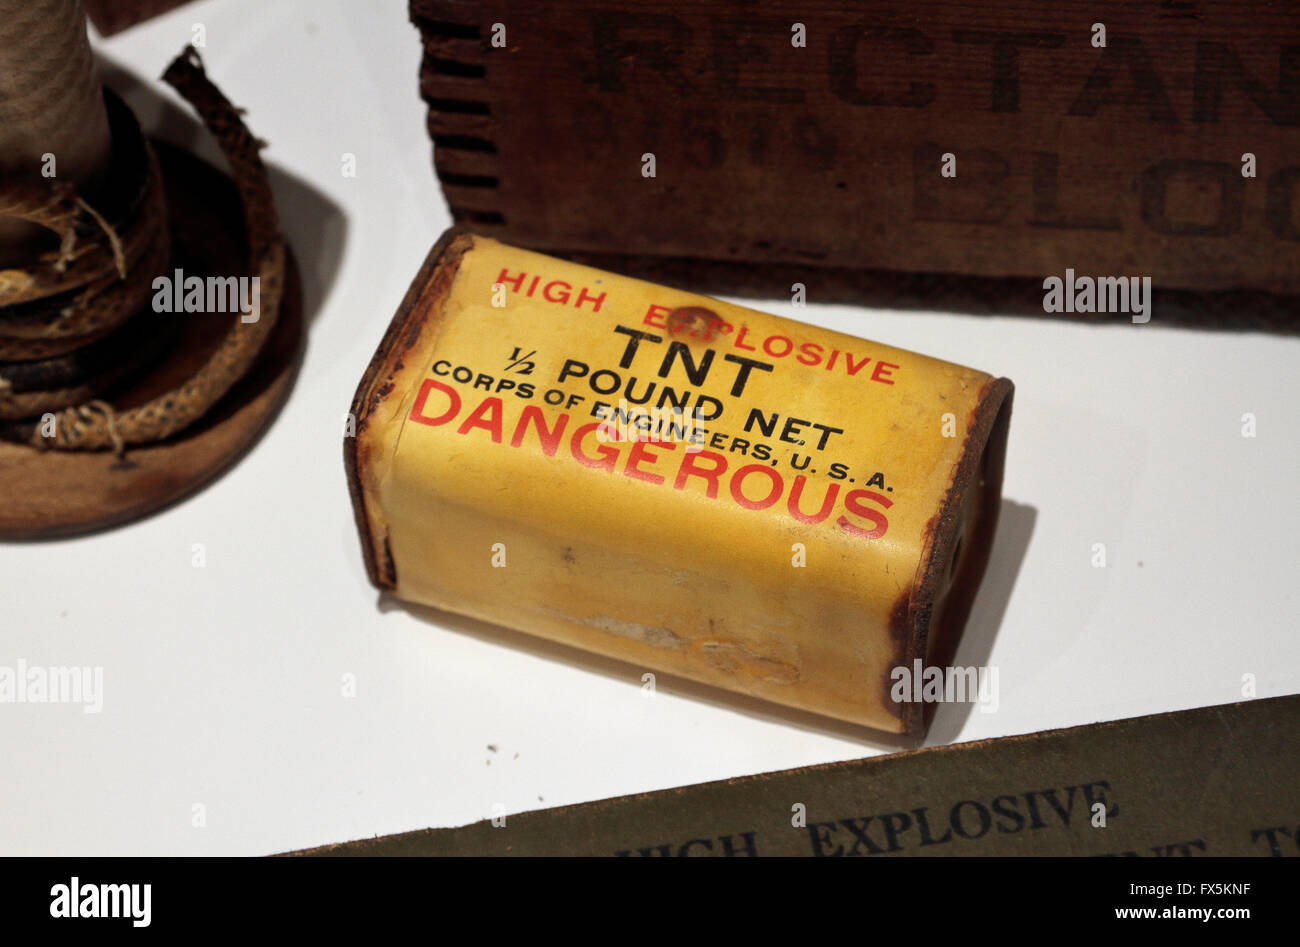 US Corps of Engineers half pound of TNT high explosives on display in the Bastogne War Museum, Bastogne, Belgium. Stock Photo